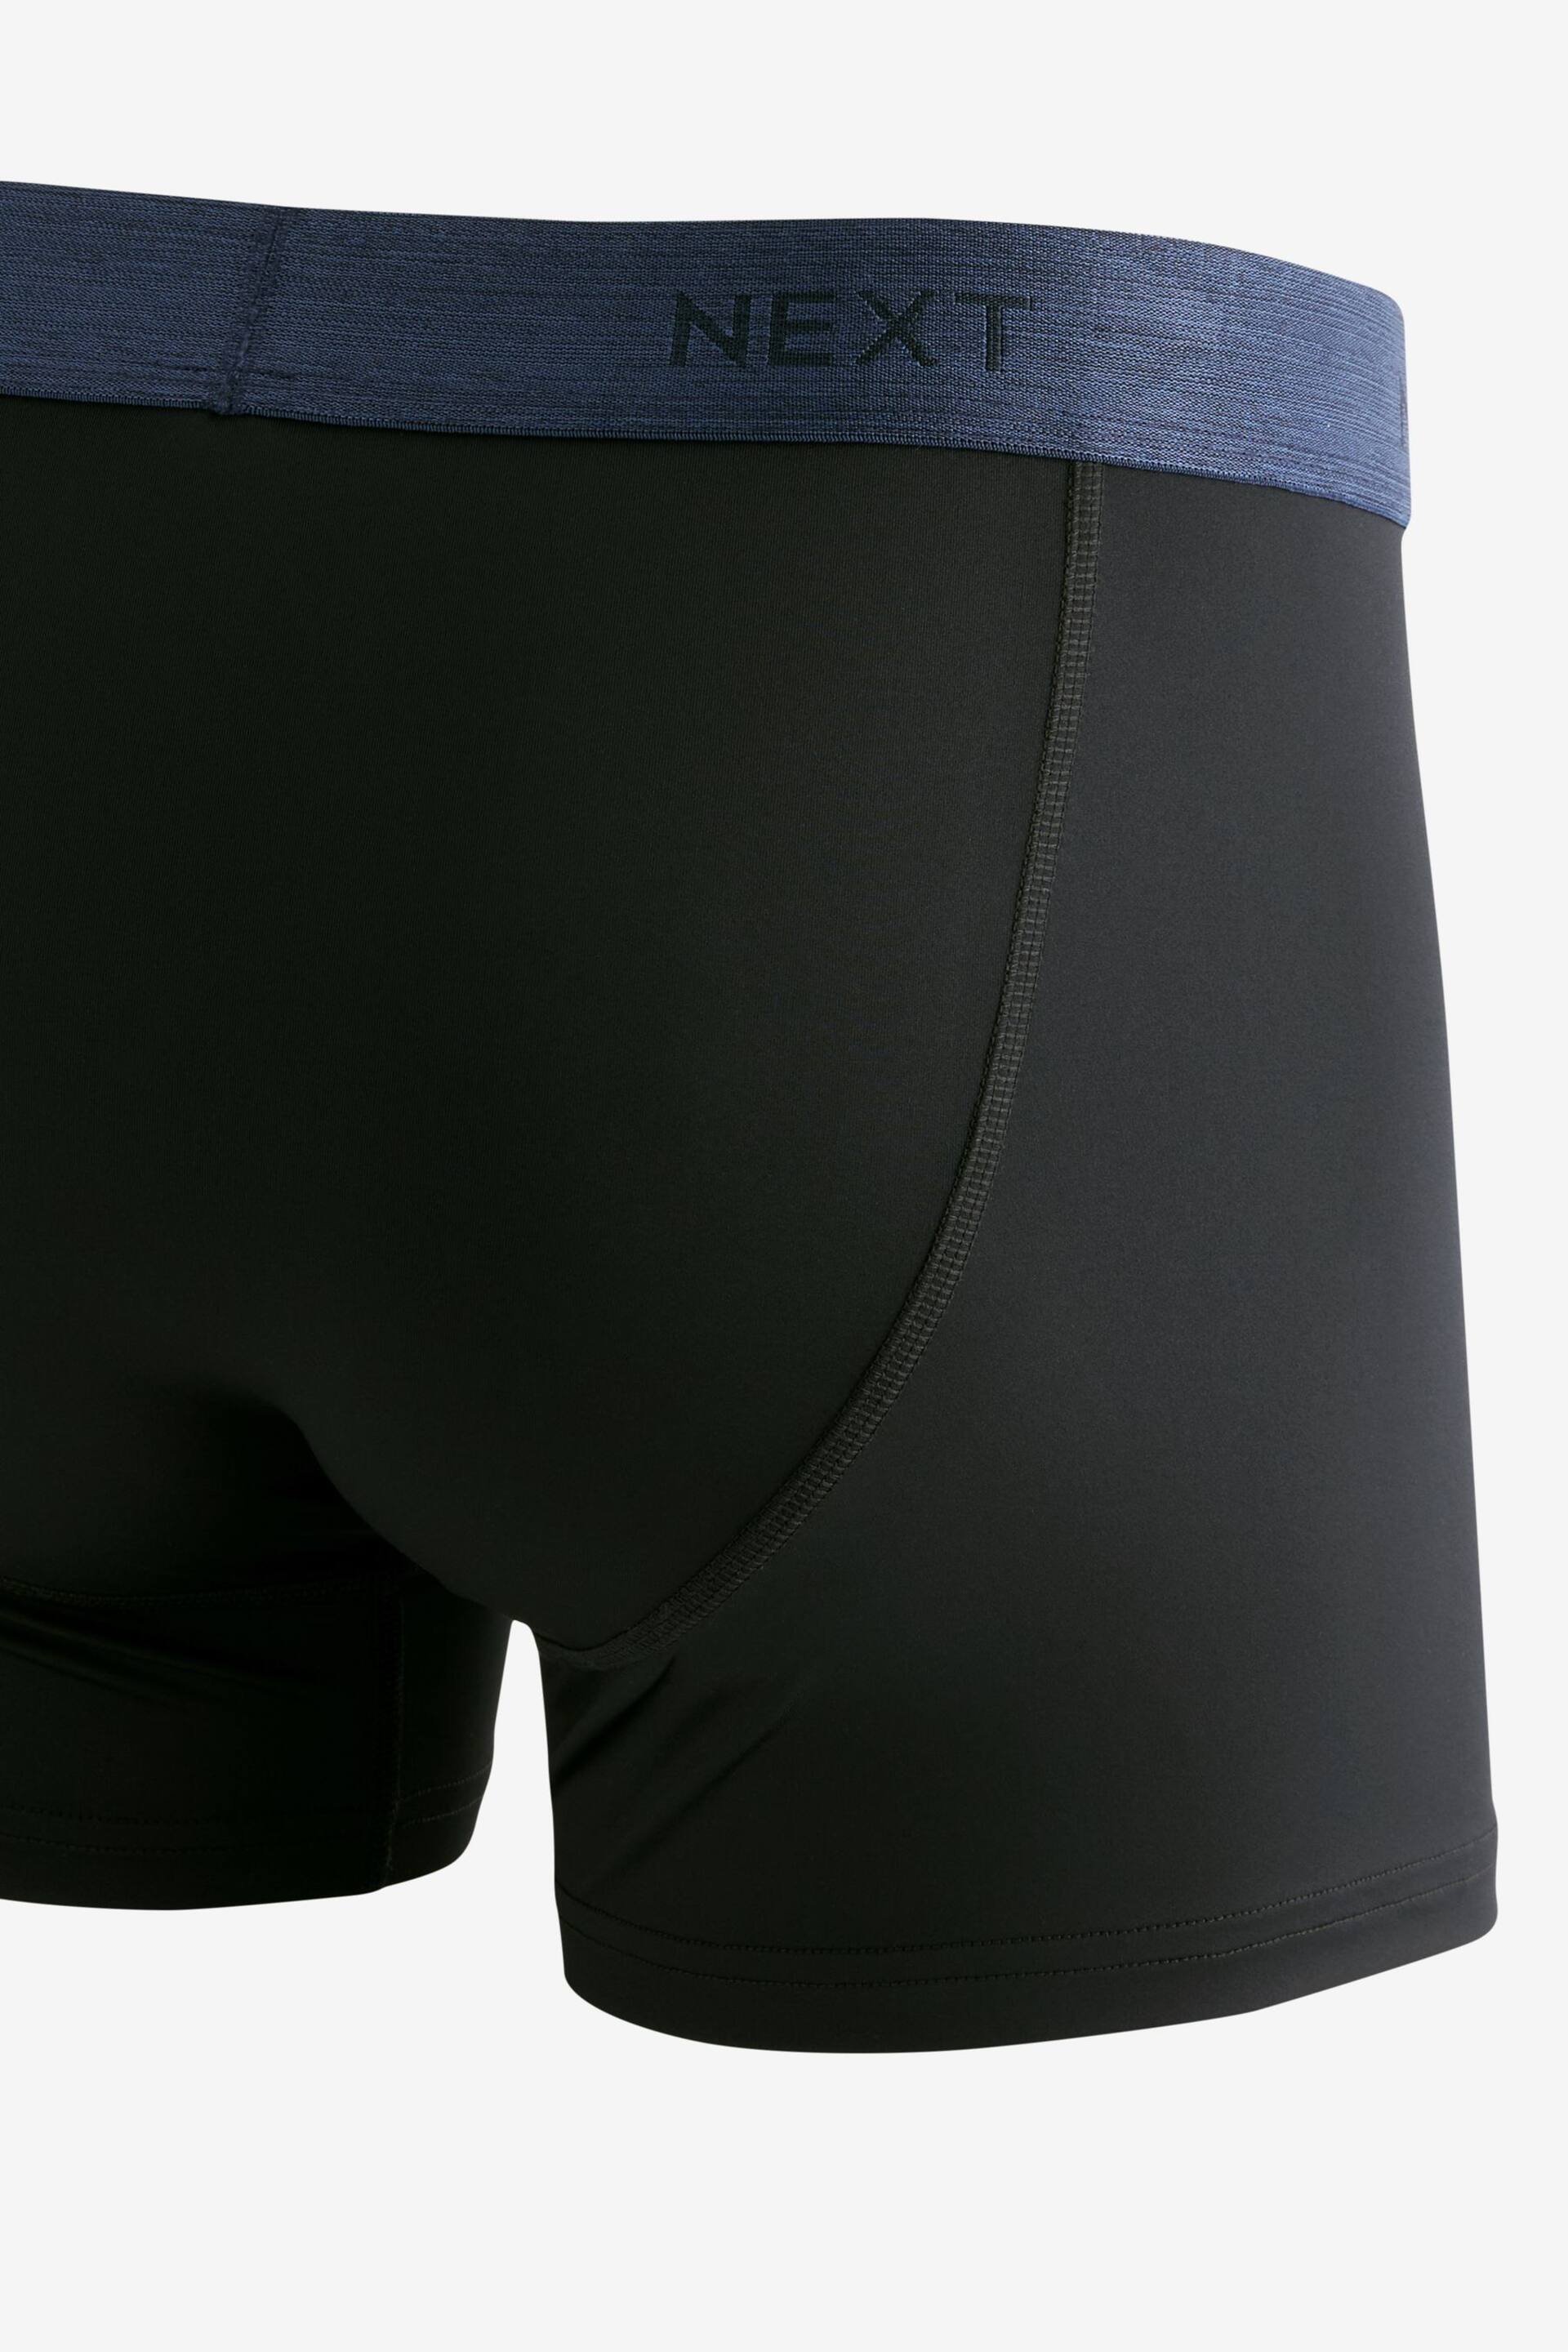 Black Bright Metallic Waistband Motionflex A-Fronts Boxers 4 Pack - Image 6 of 7